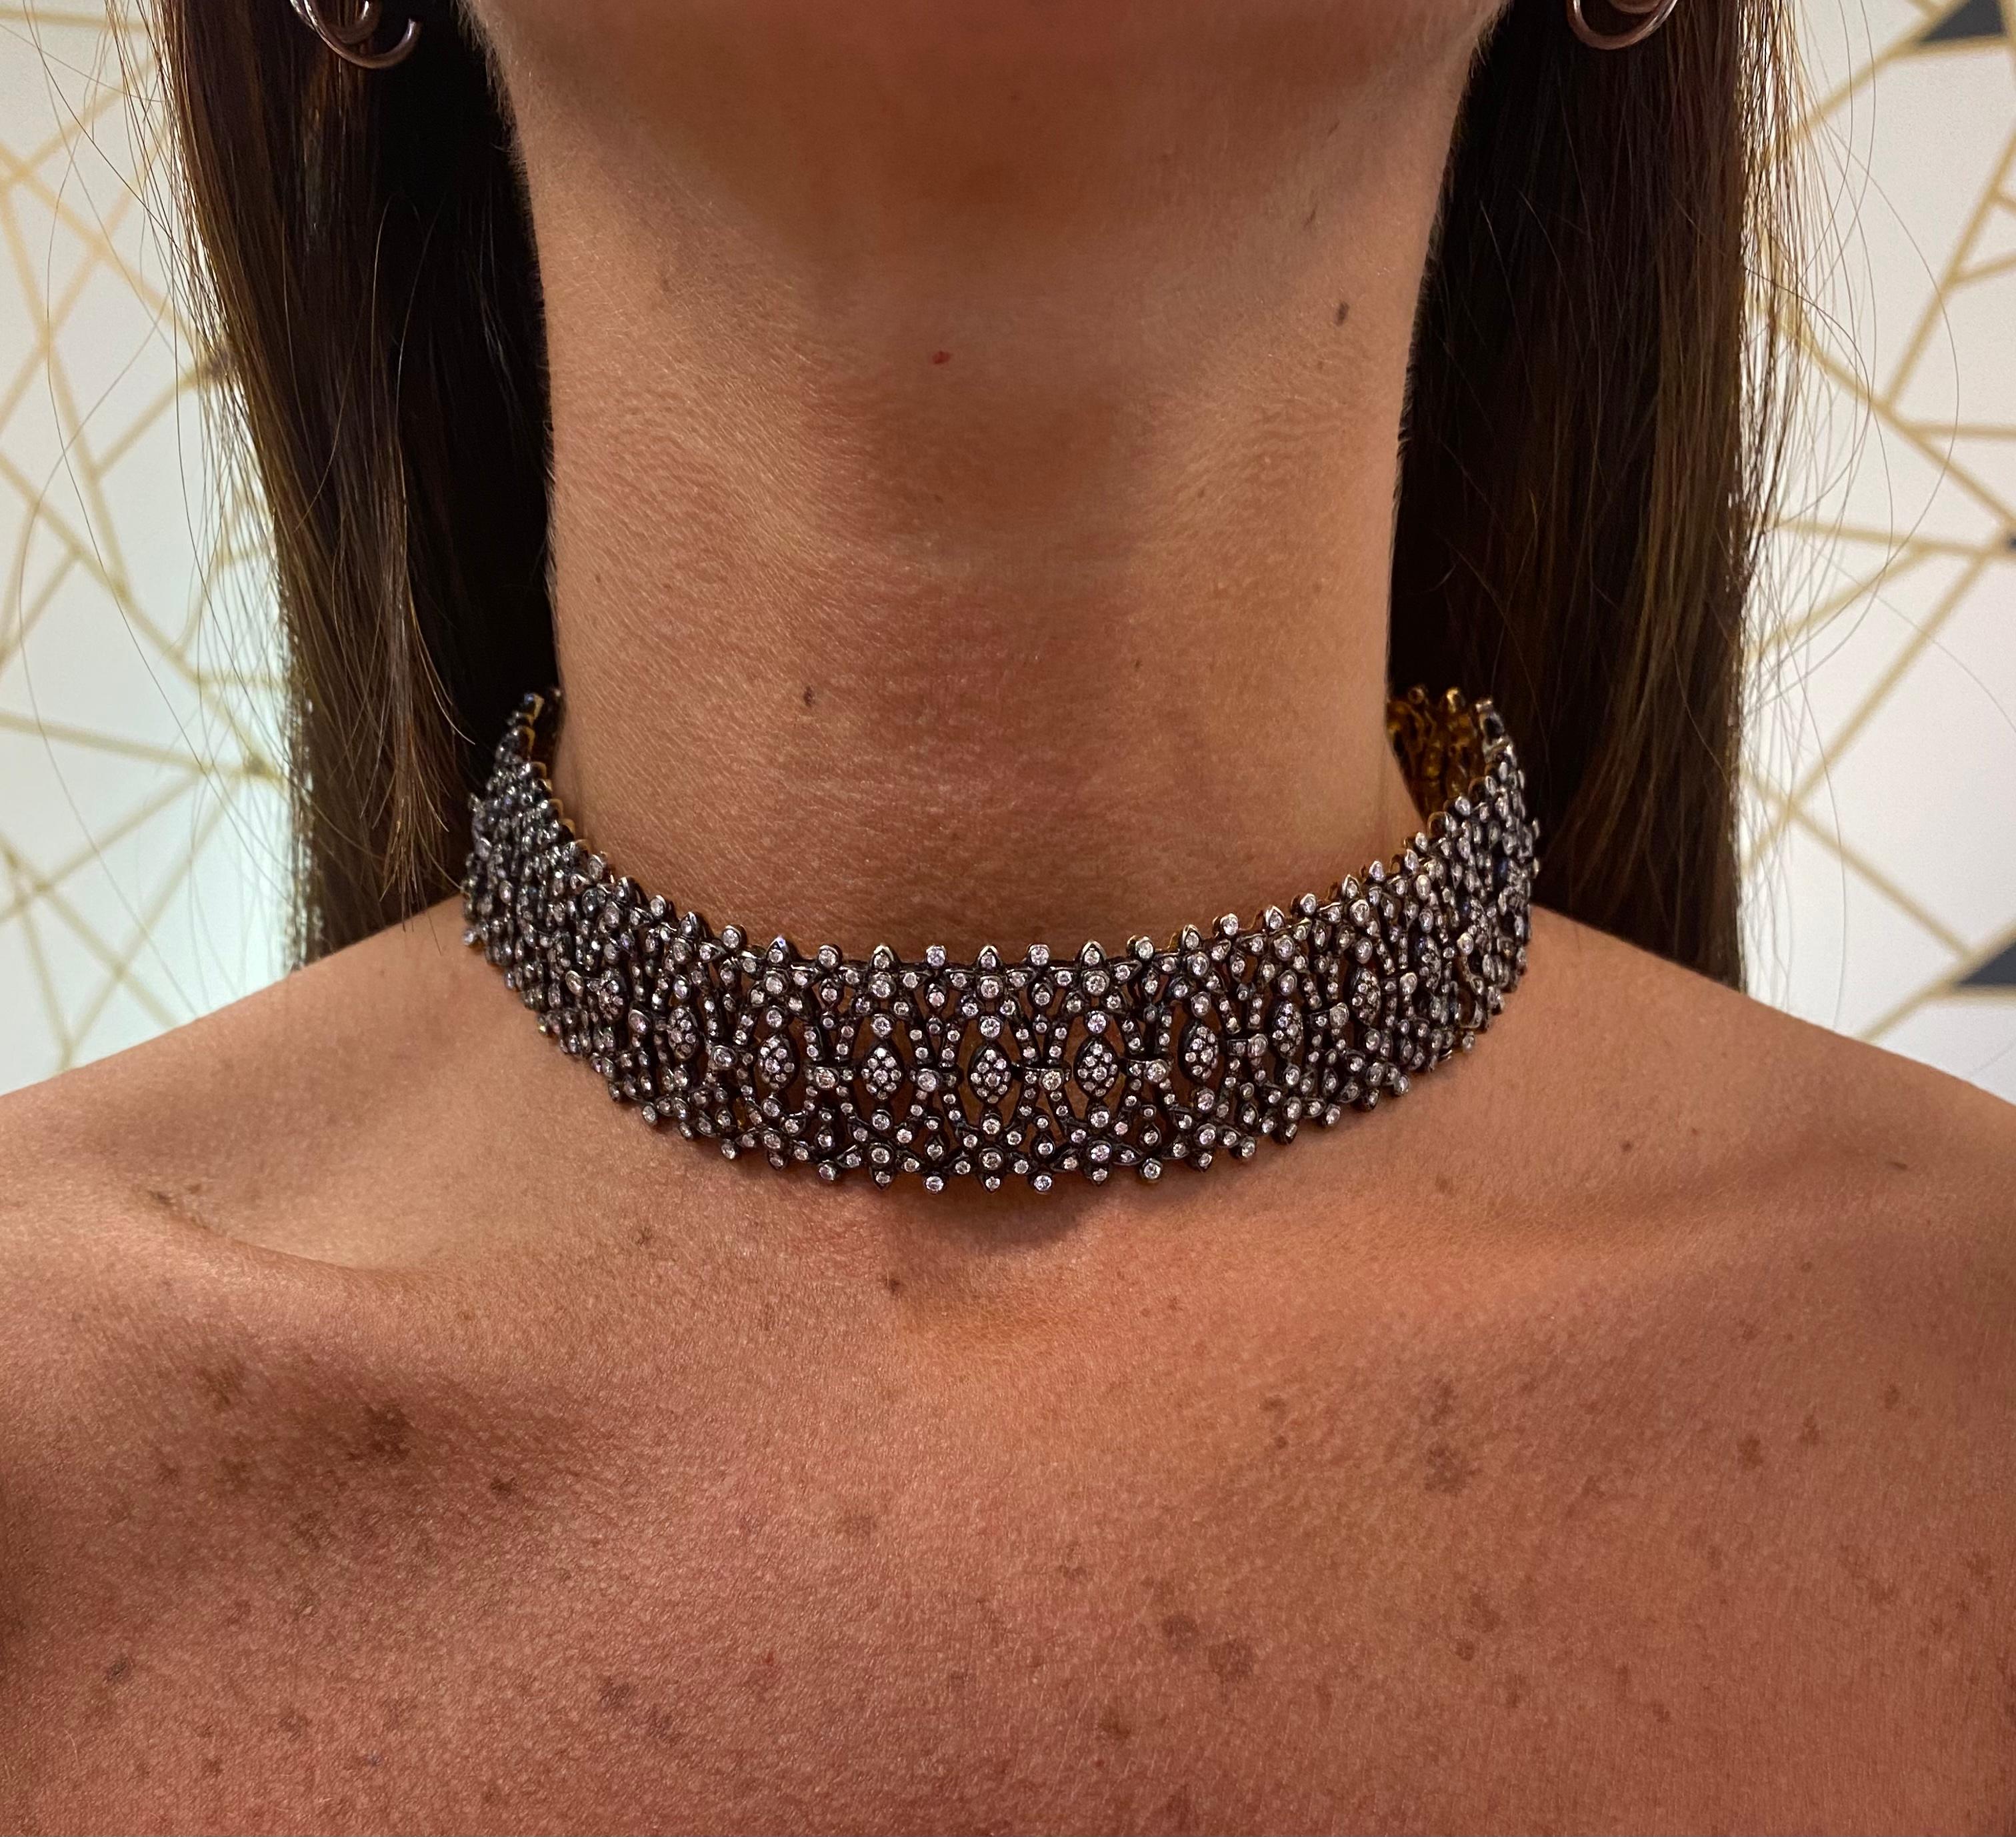 Diamond Choker In Excellent Condition For Sale In New York, NY